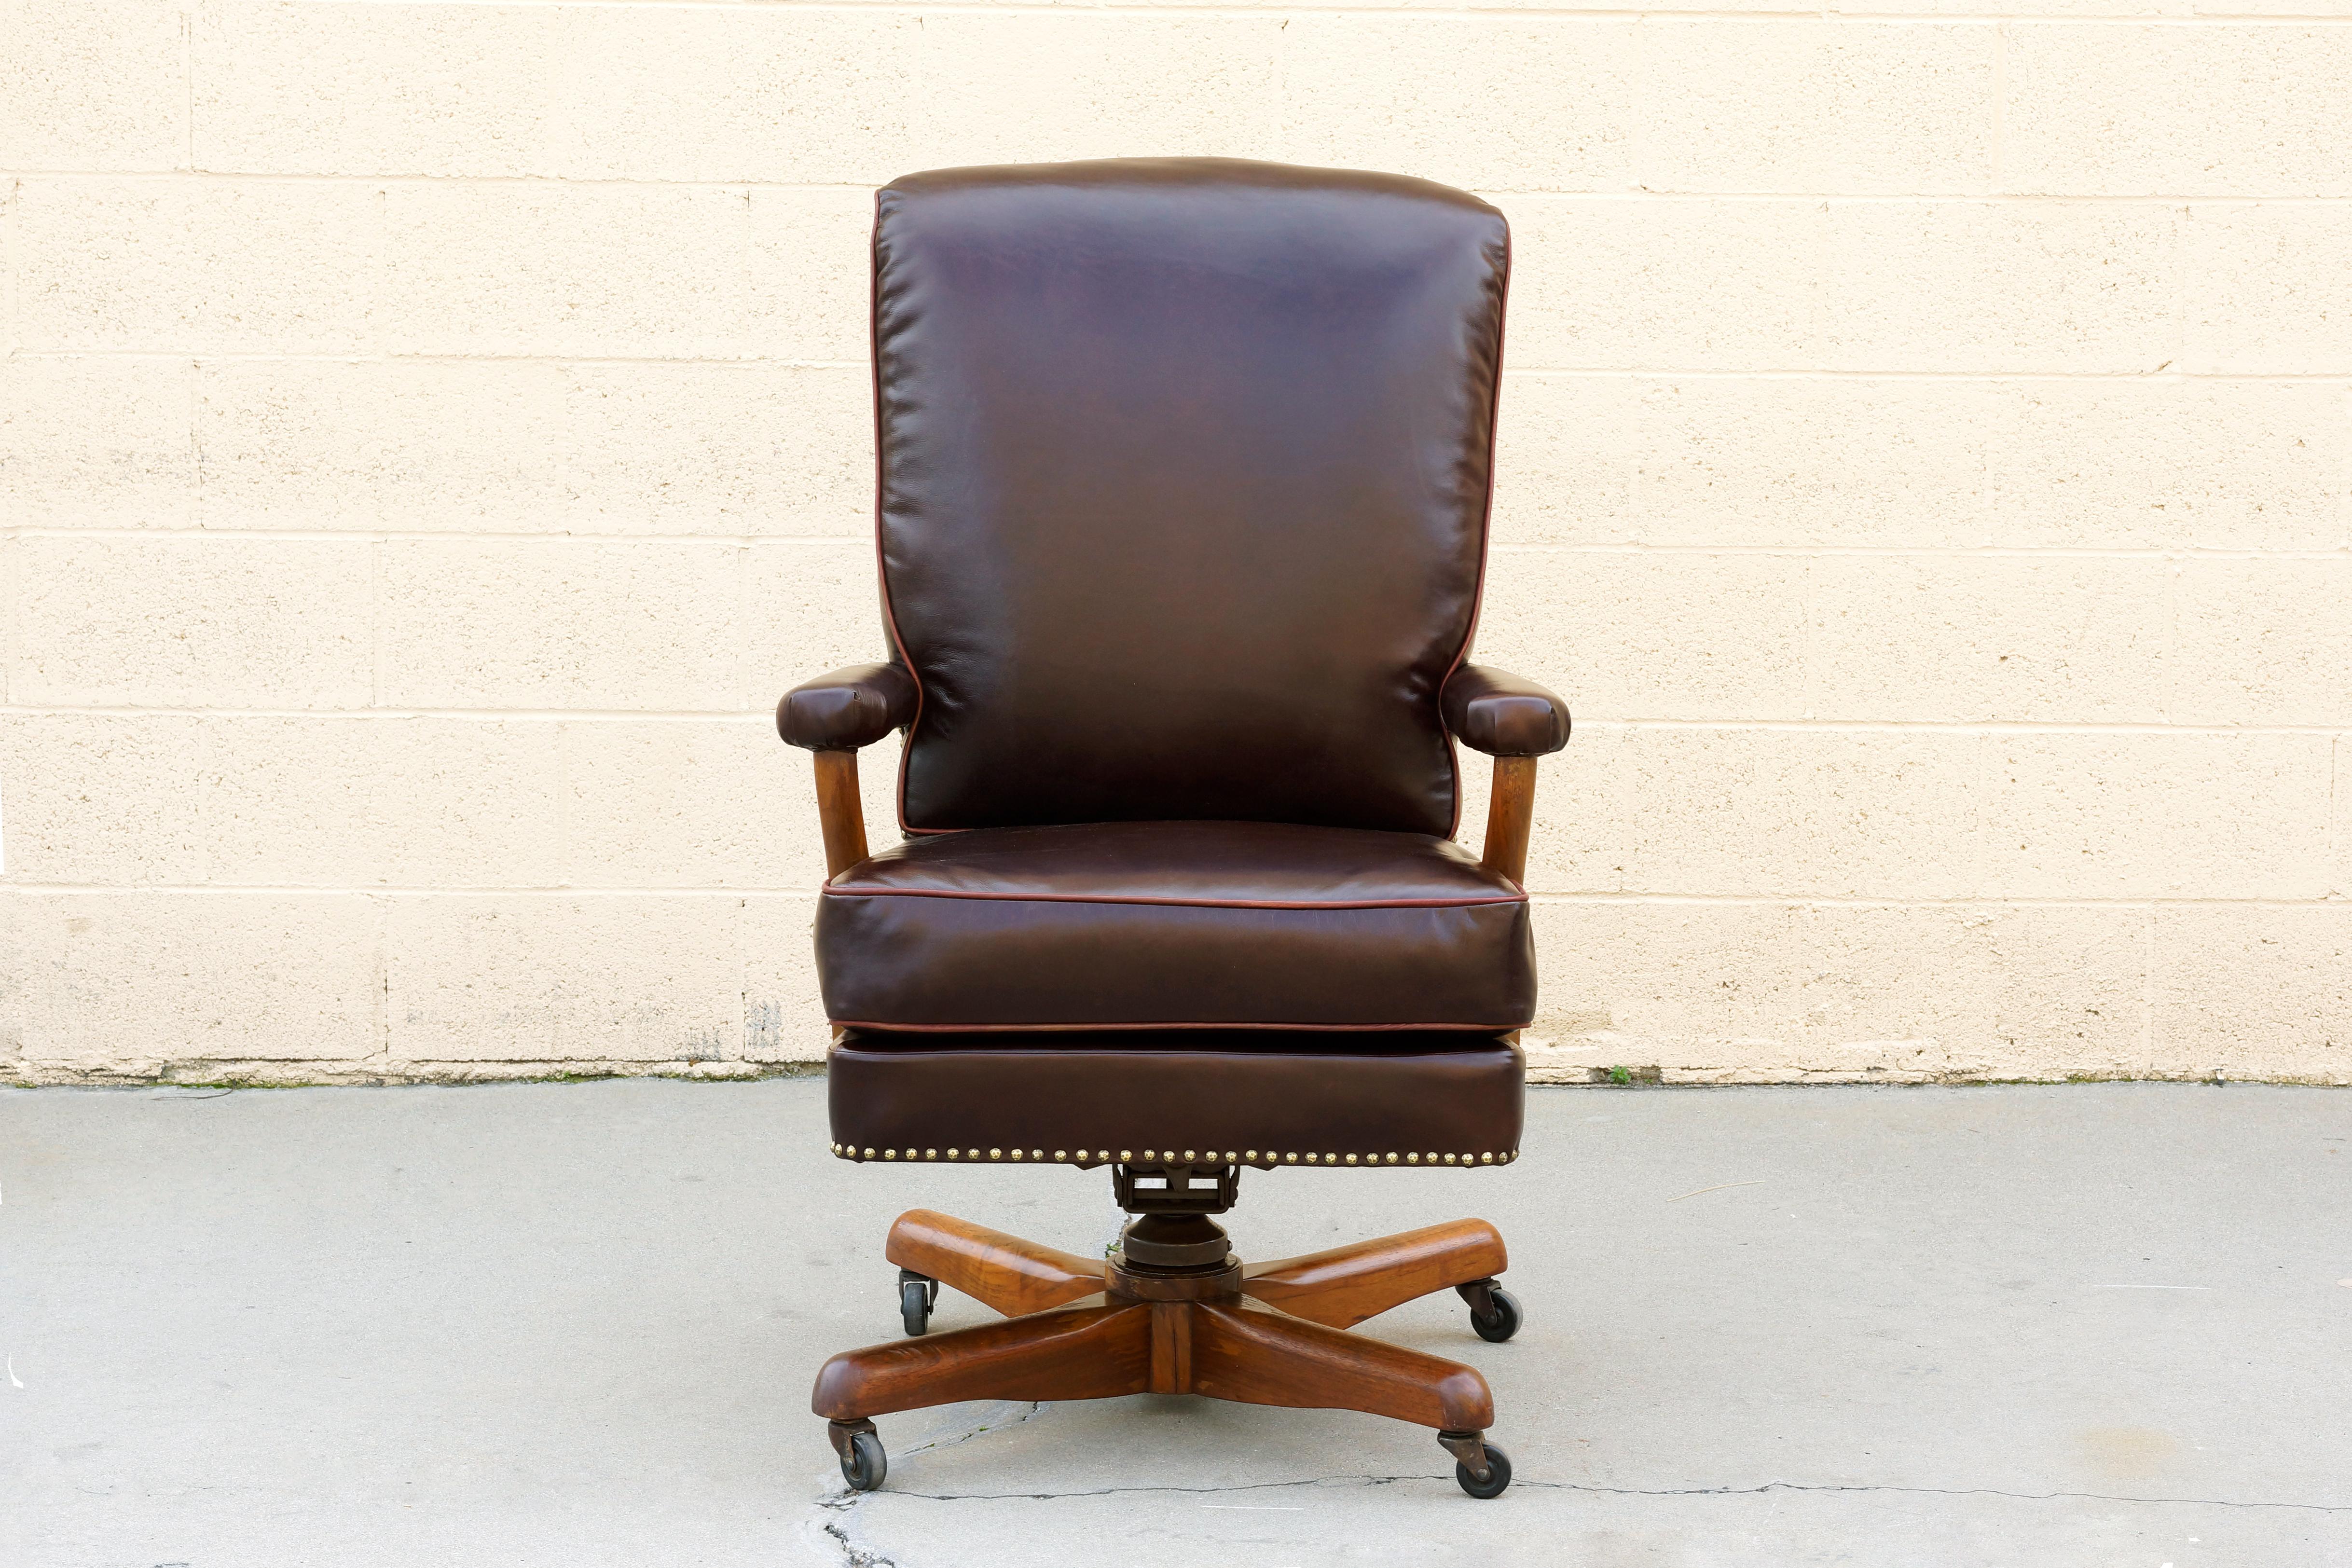 American Craftsman Antique Leather and Walnut Armchair, Refinished For Sale